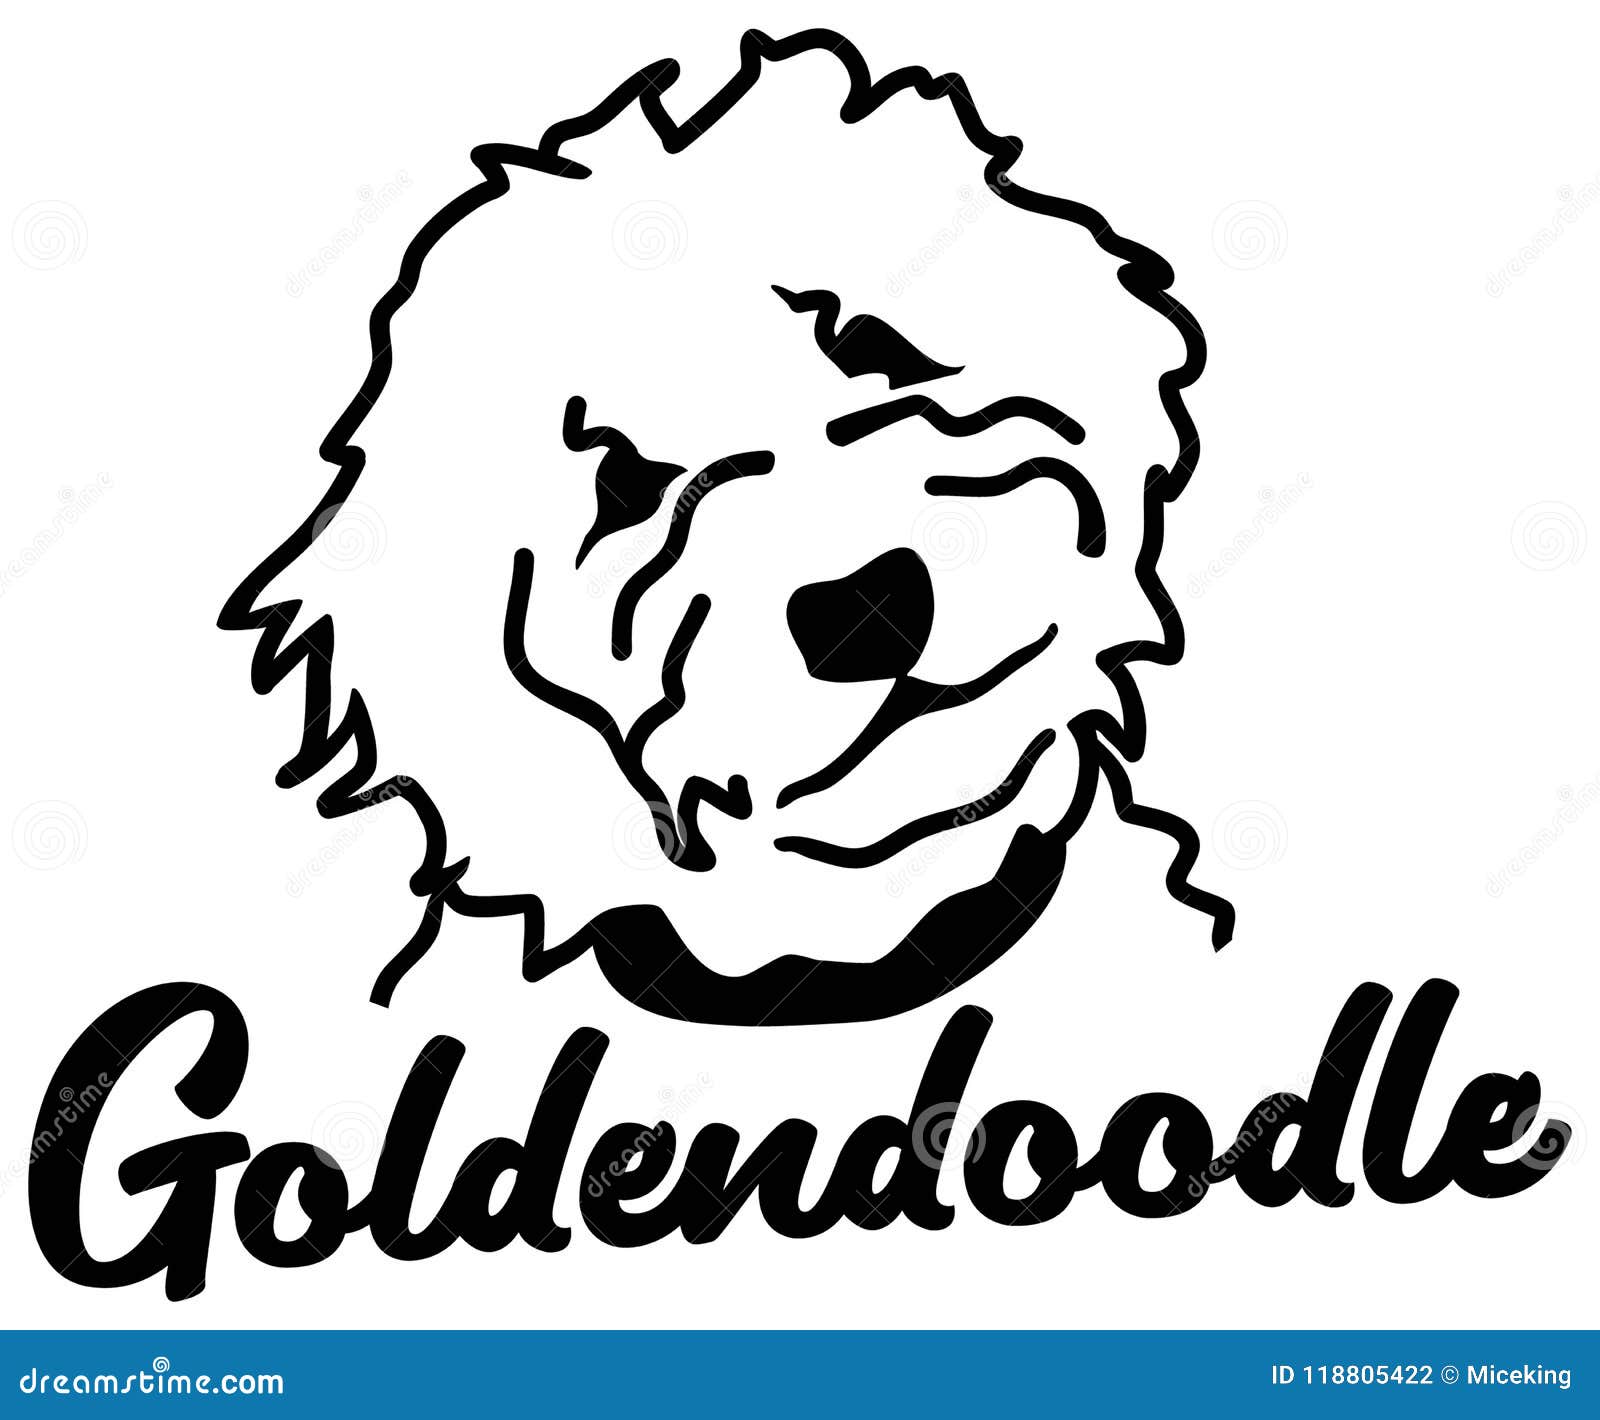 Goldendoodle Cartoons, Illustrations & Vector Stock Images - 56